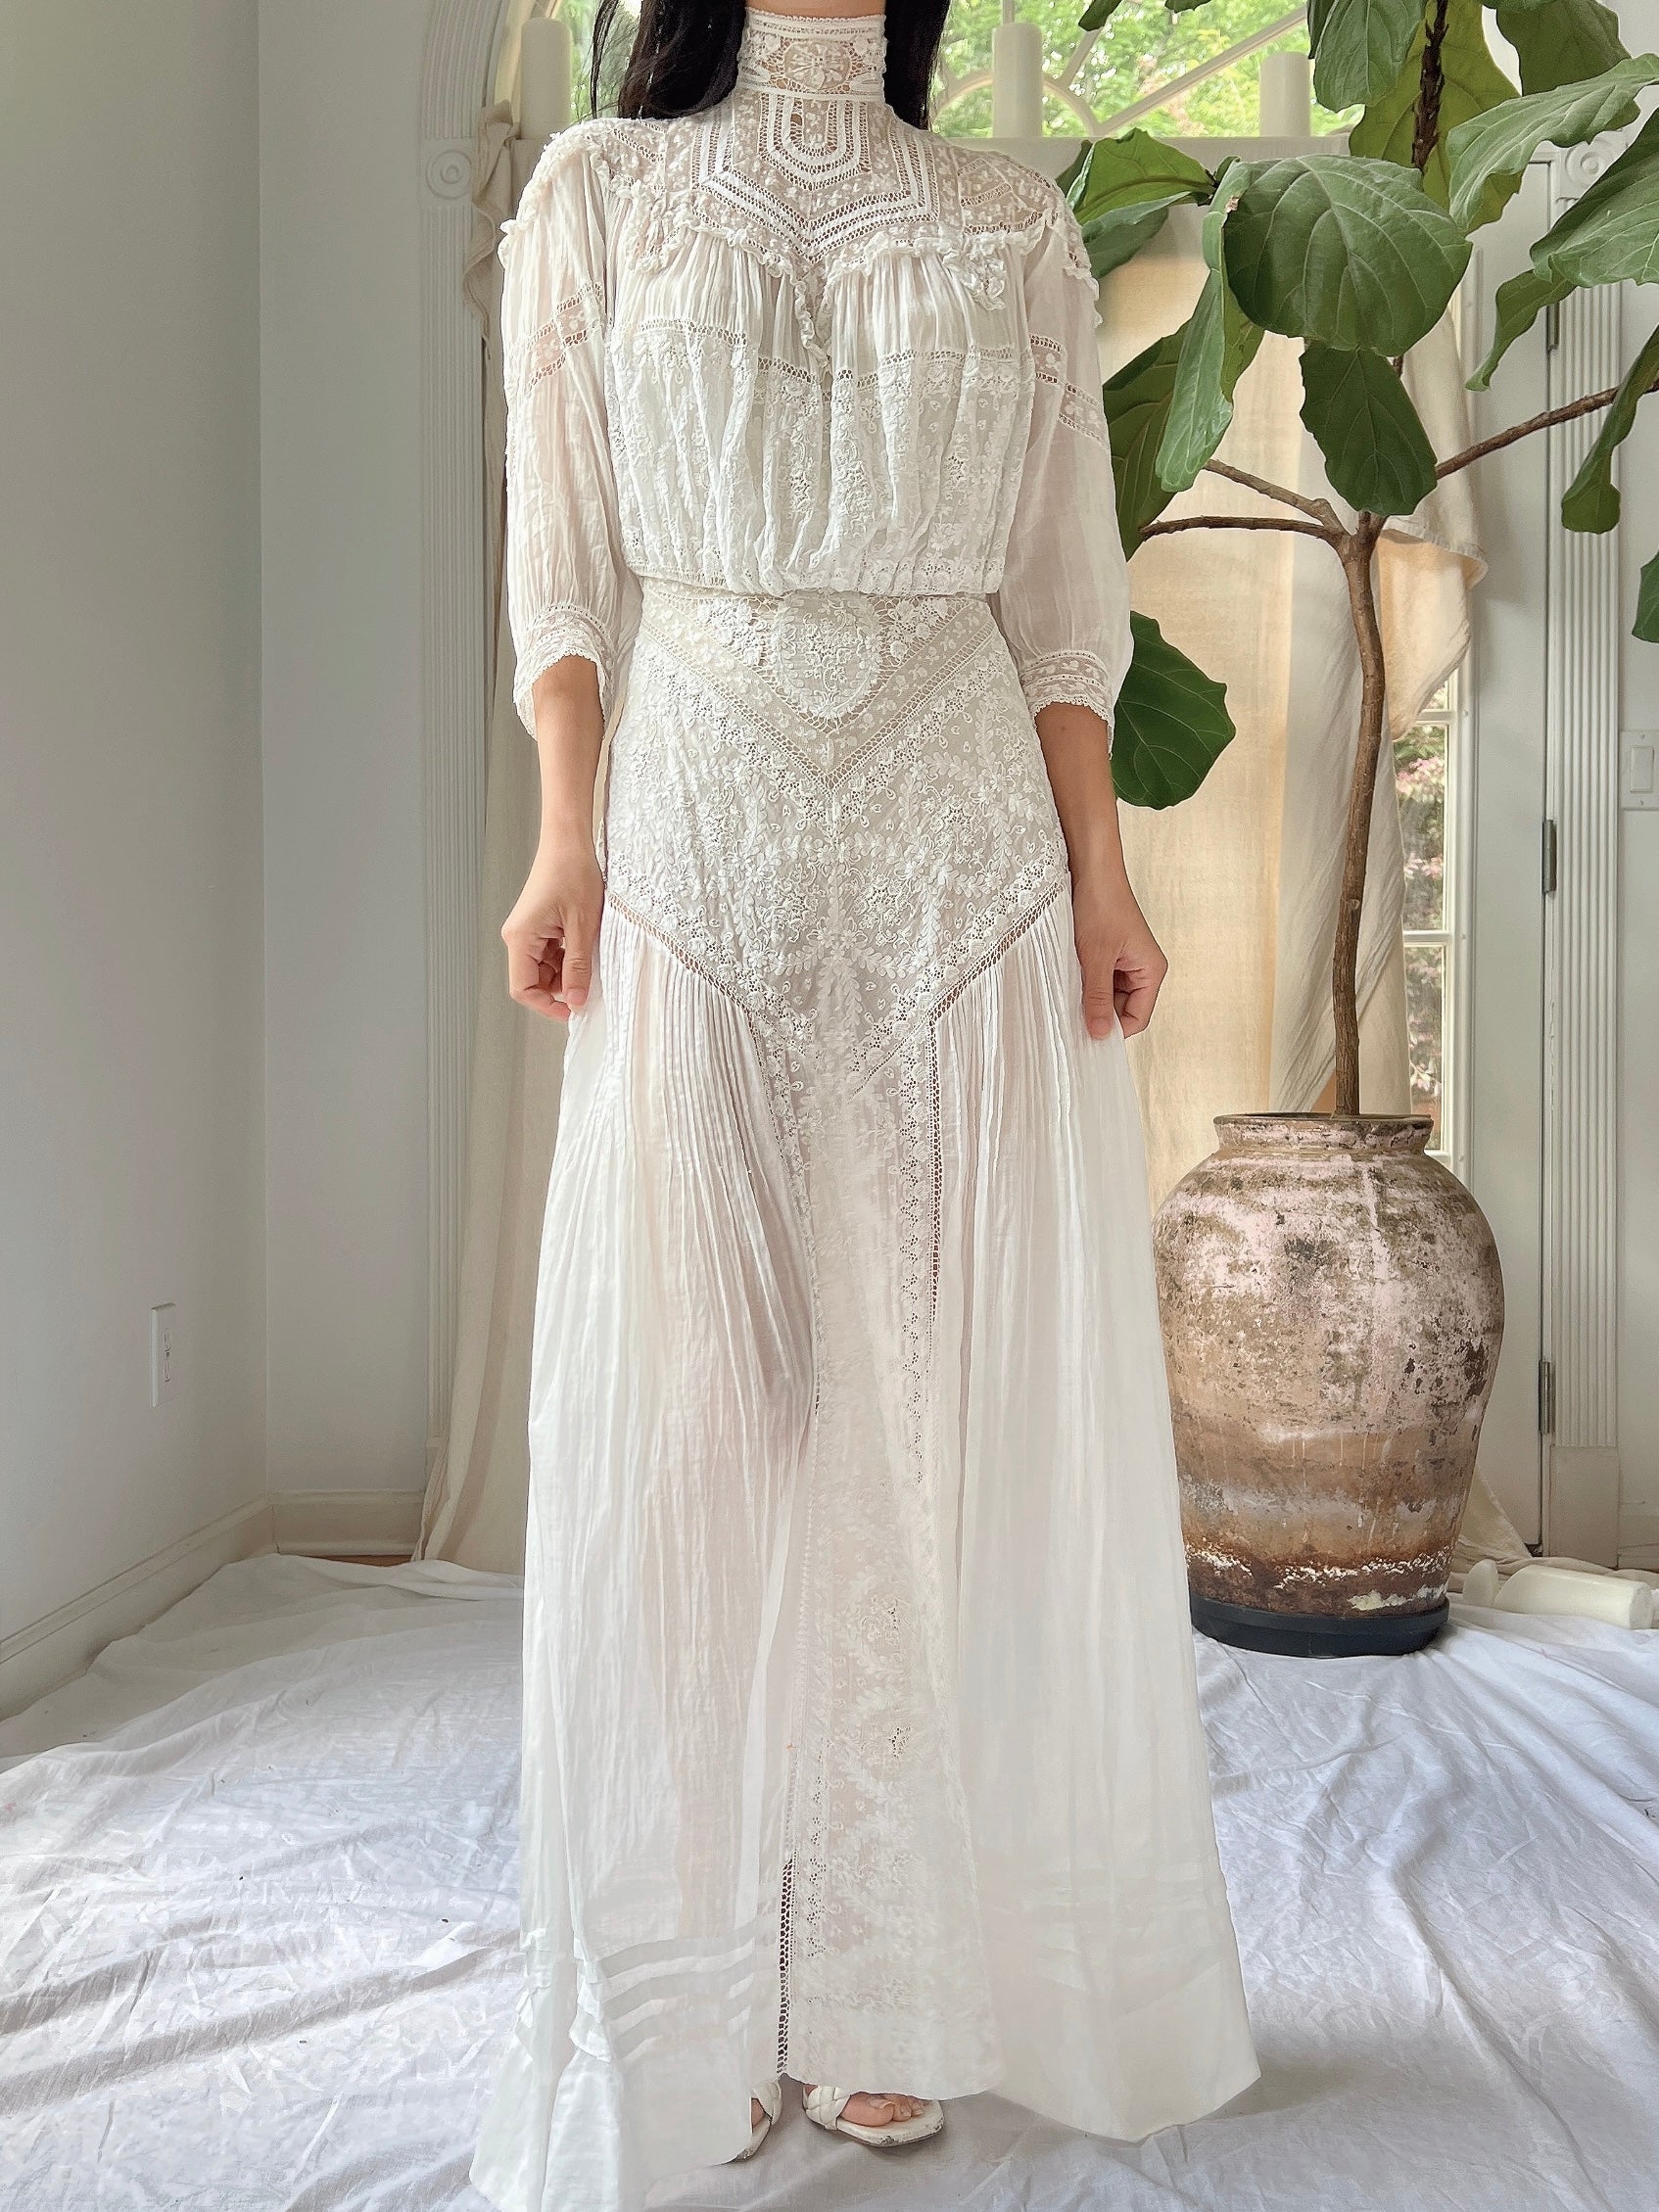 Antique Belle Embroidered Batiste Gown - XS